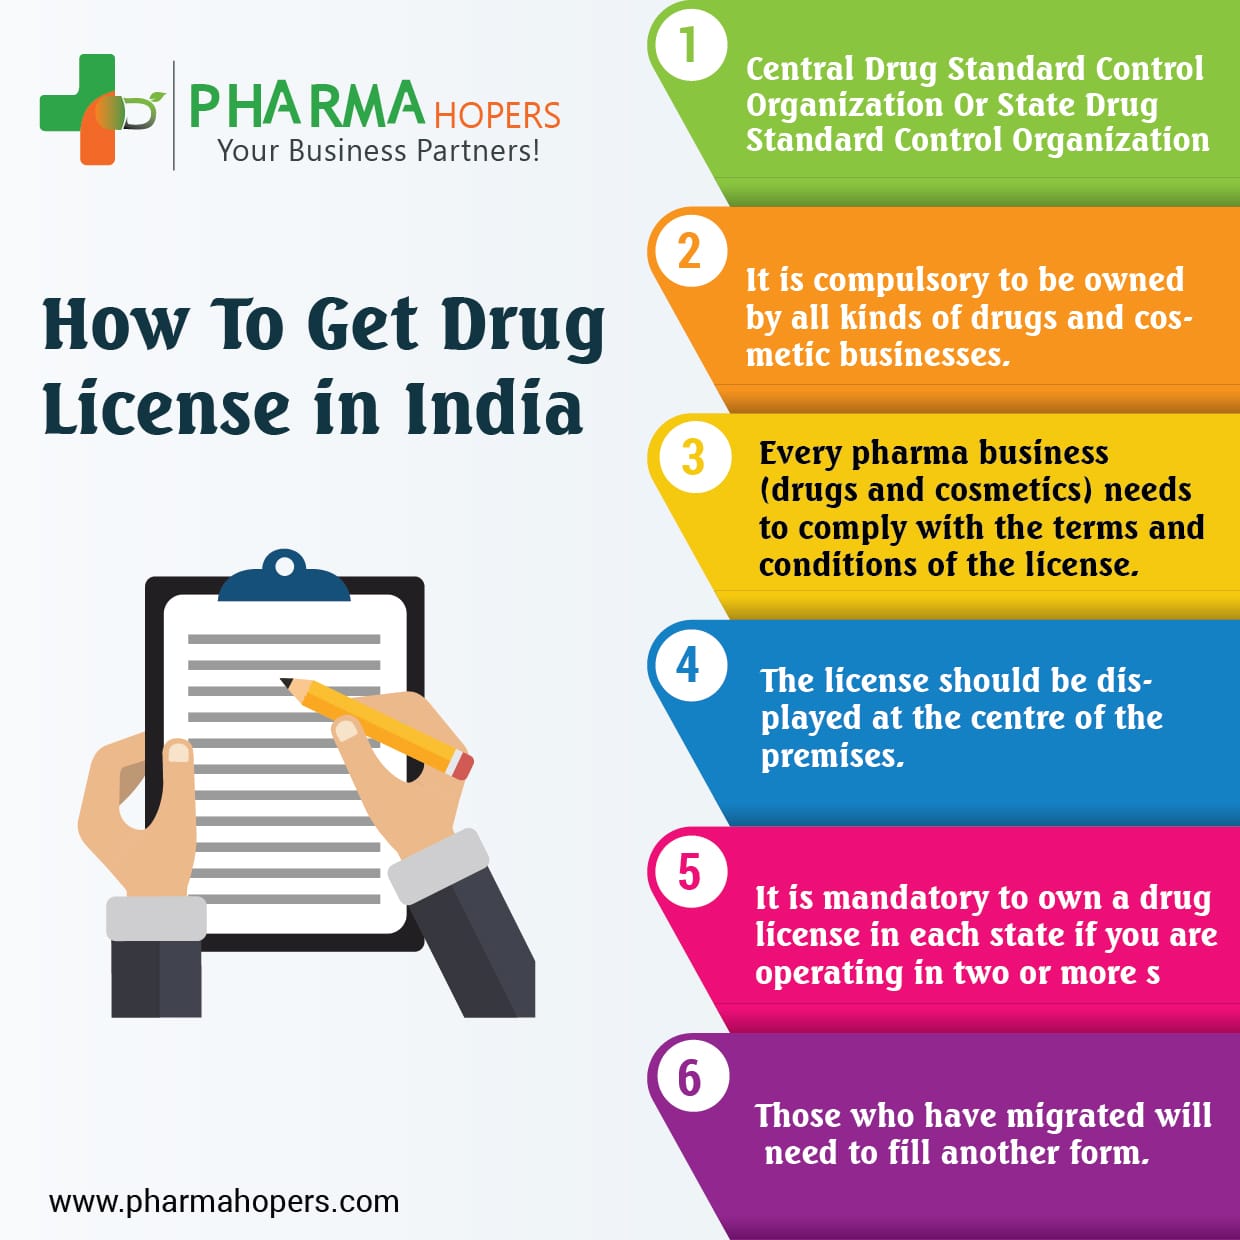 How To Get Drug License in India